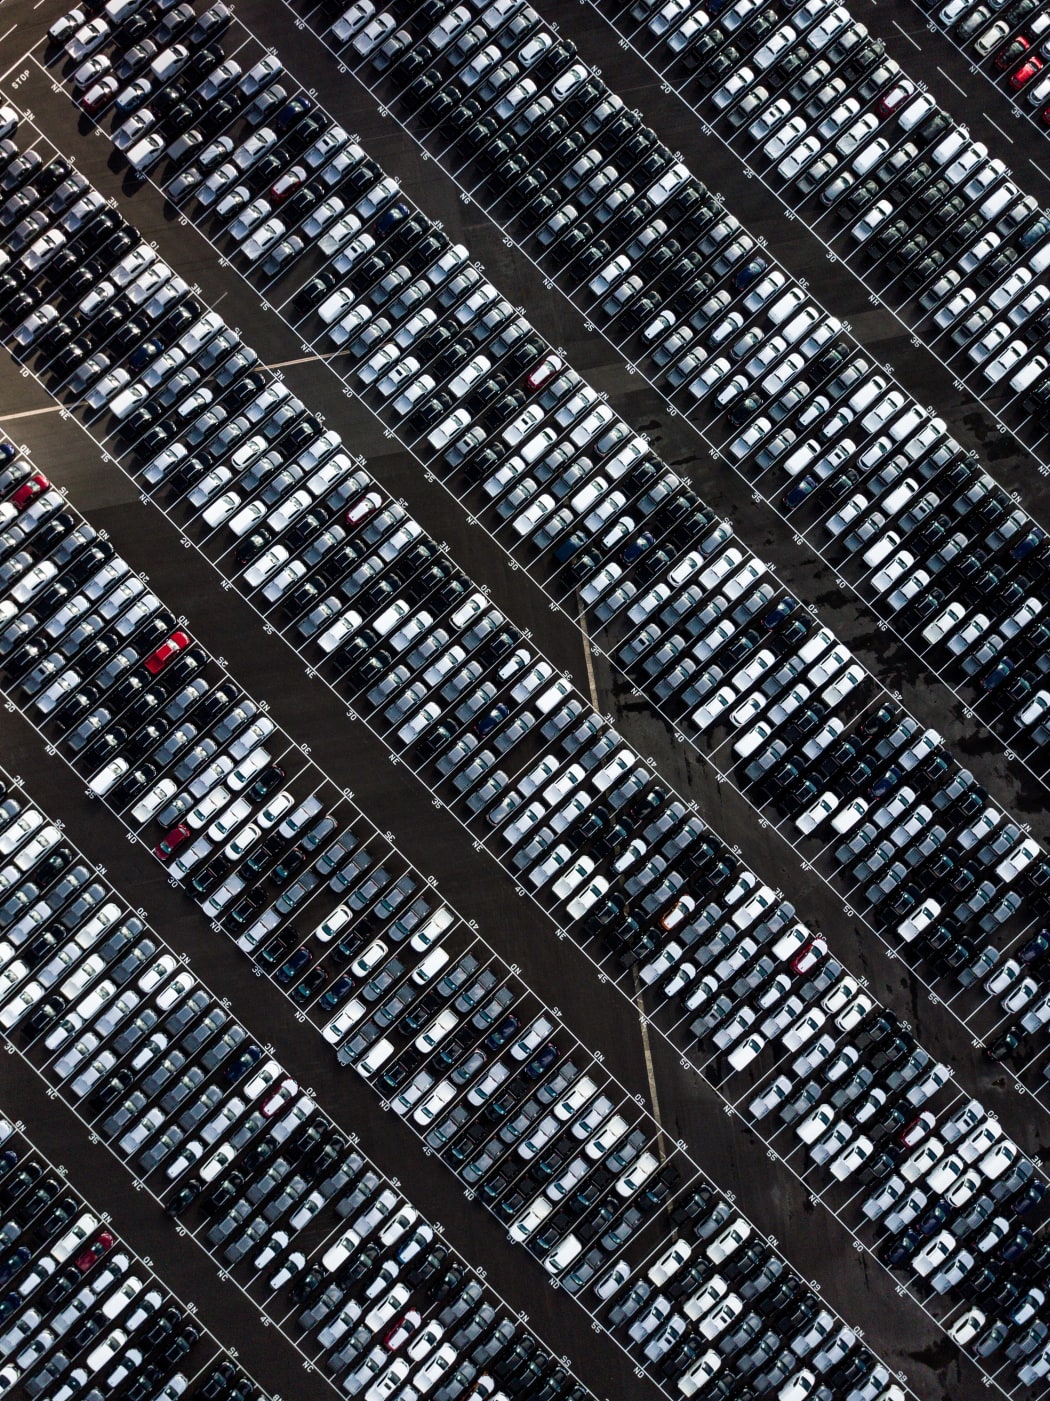 cars parked aerial view